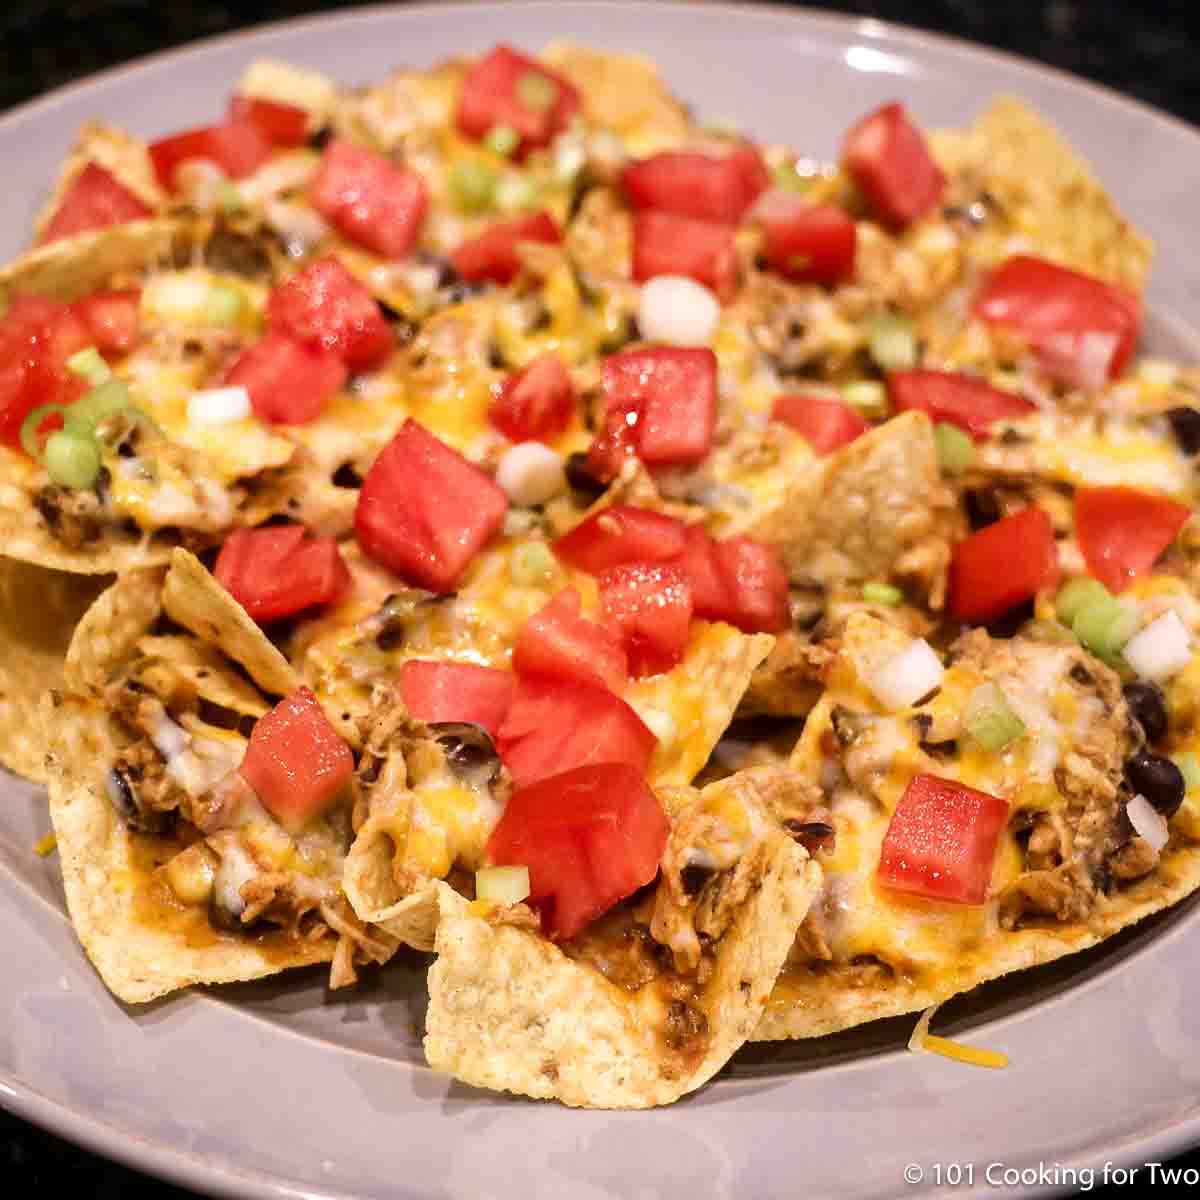 Fiesta chicken as nachos with tomato and cheese topping.